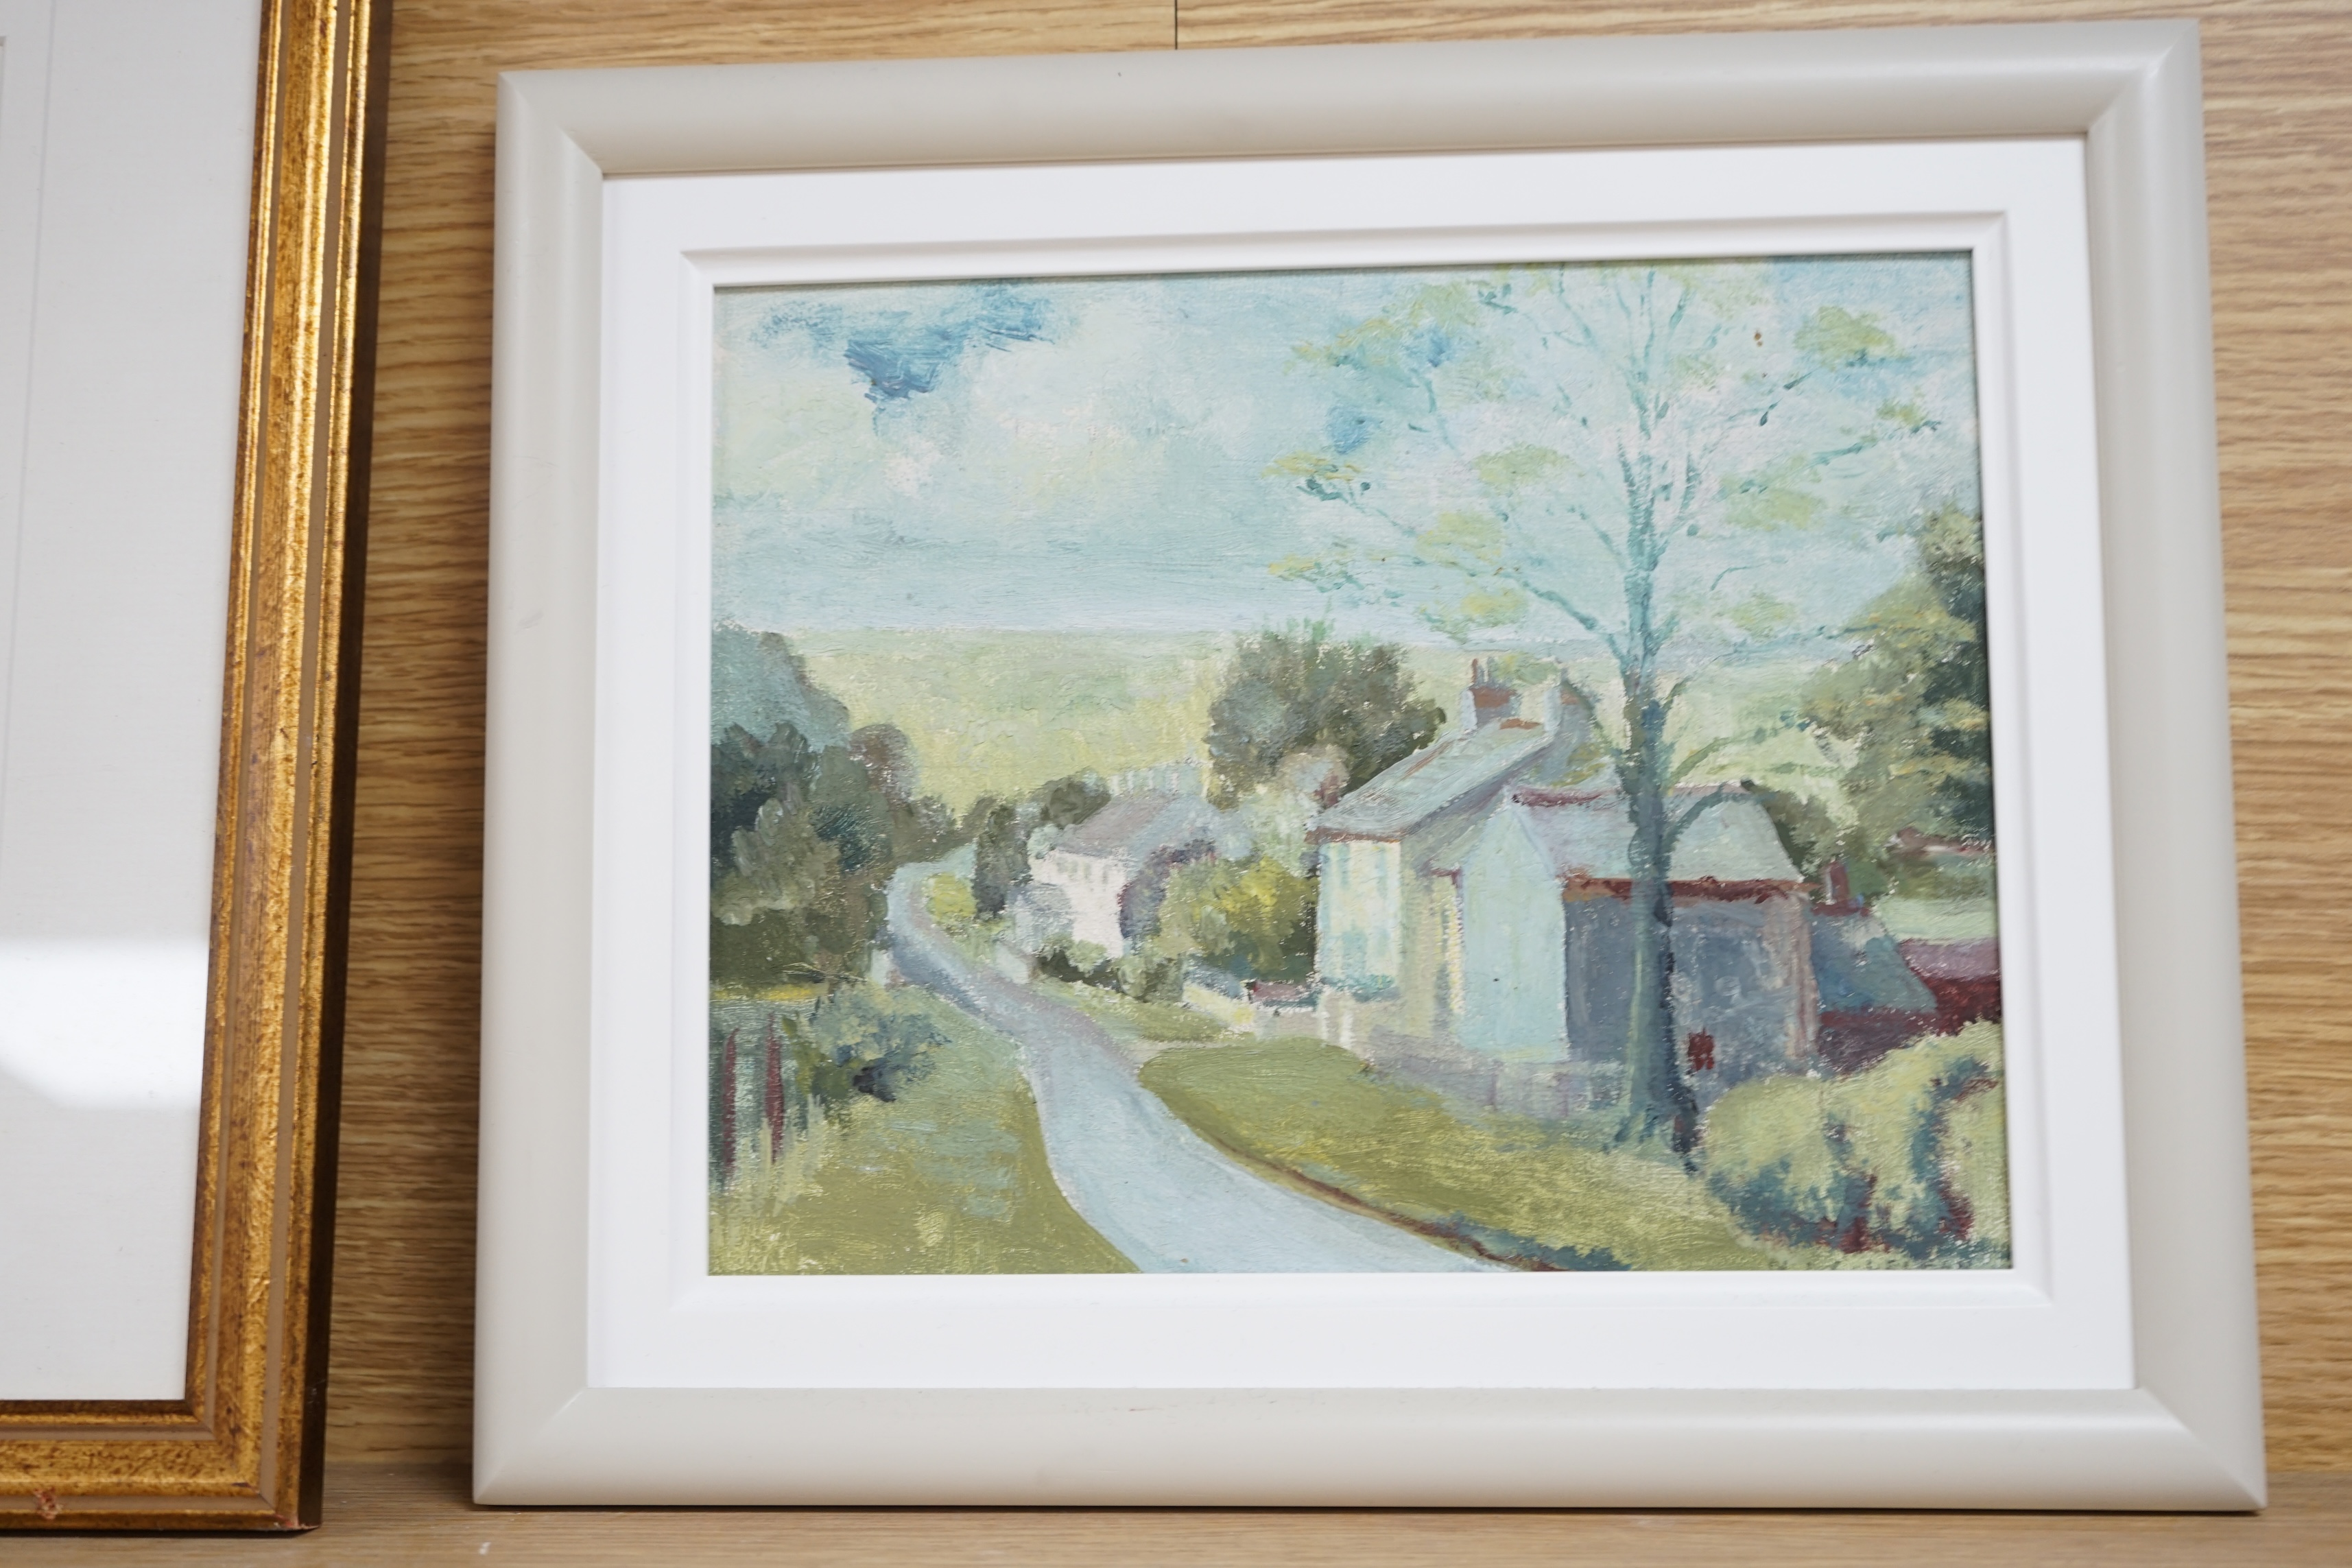 Nick Lelean, two oils on board, Studies of houses in Waverton, Wigton, Lake District, one signed, 19 x 24cm. Condition - good